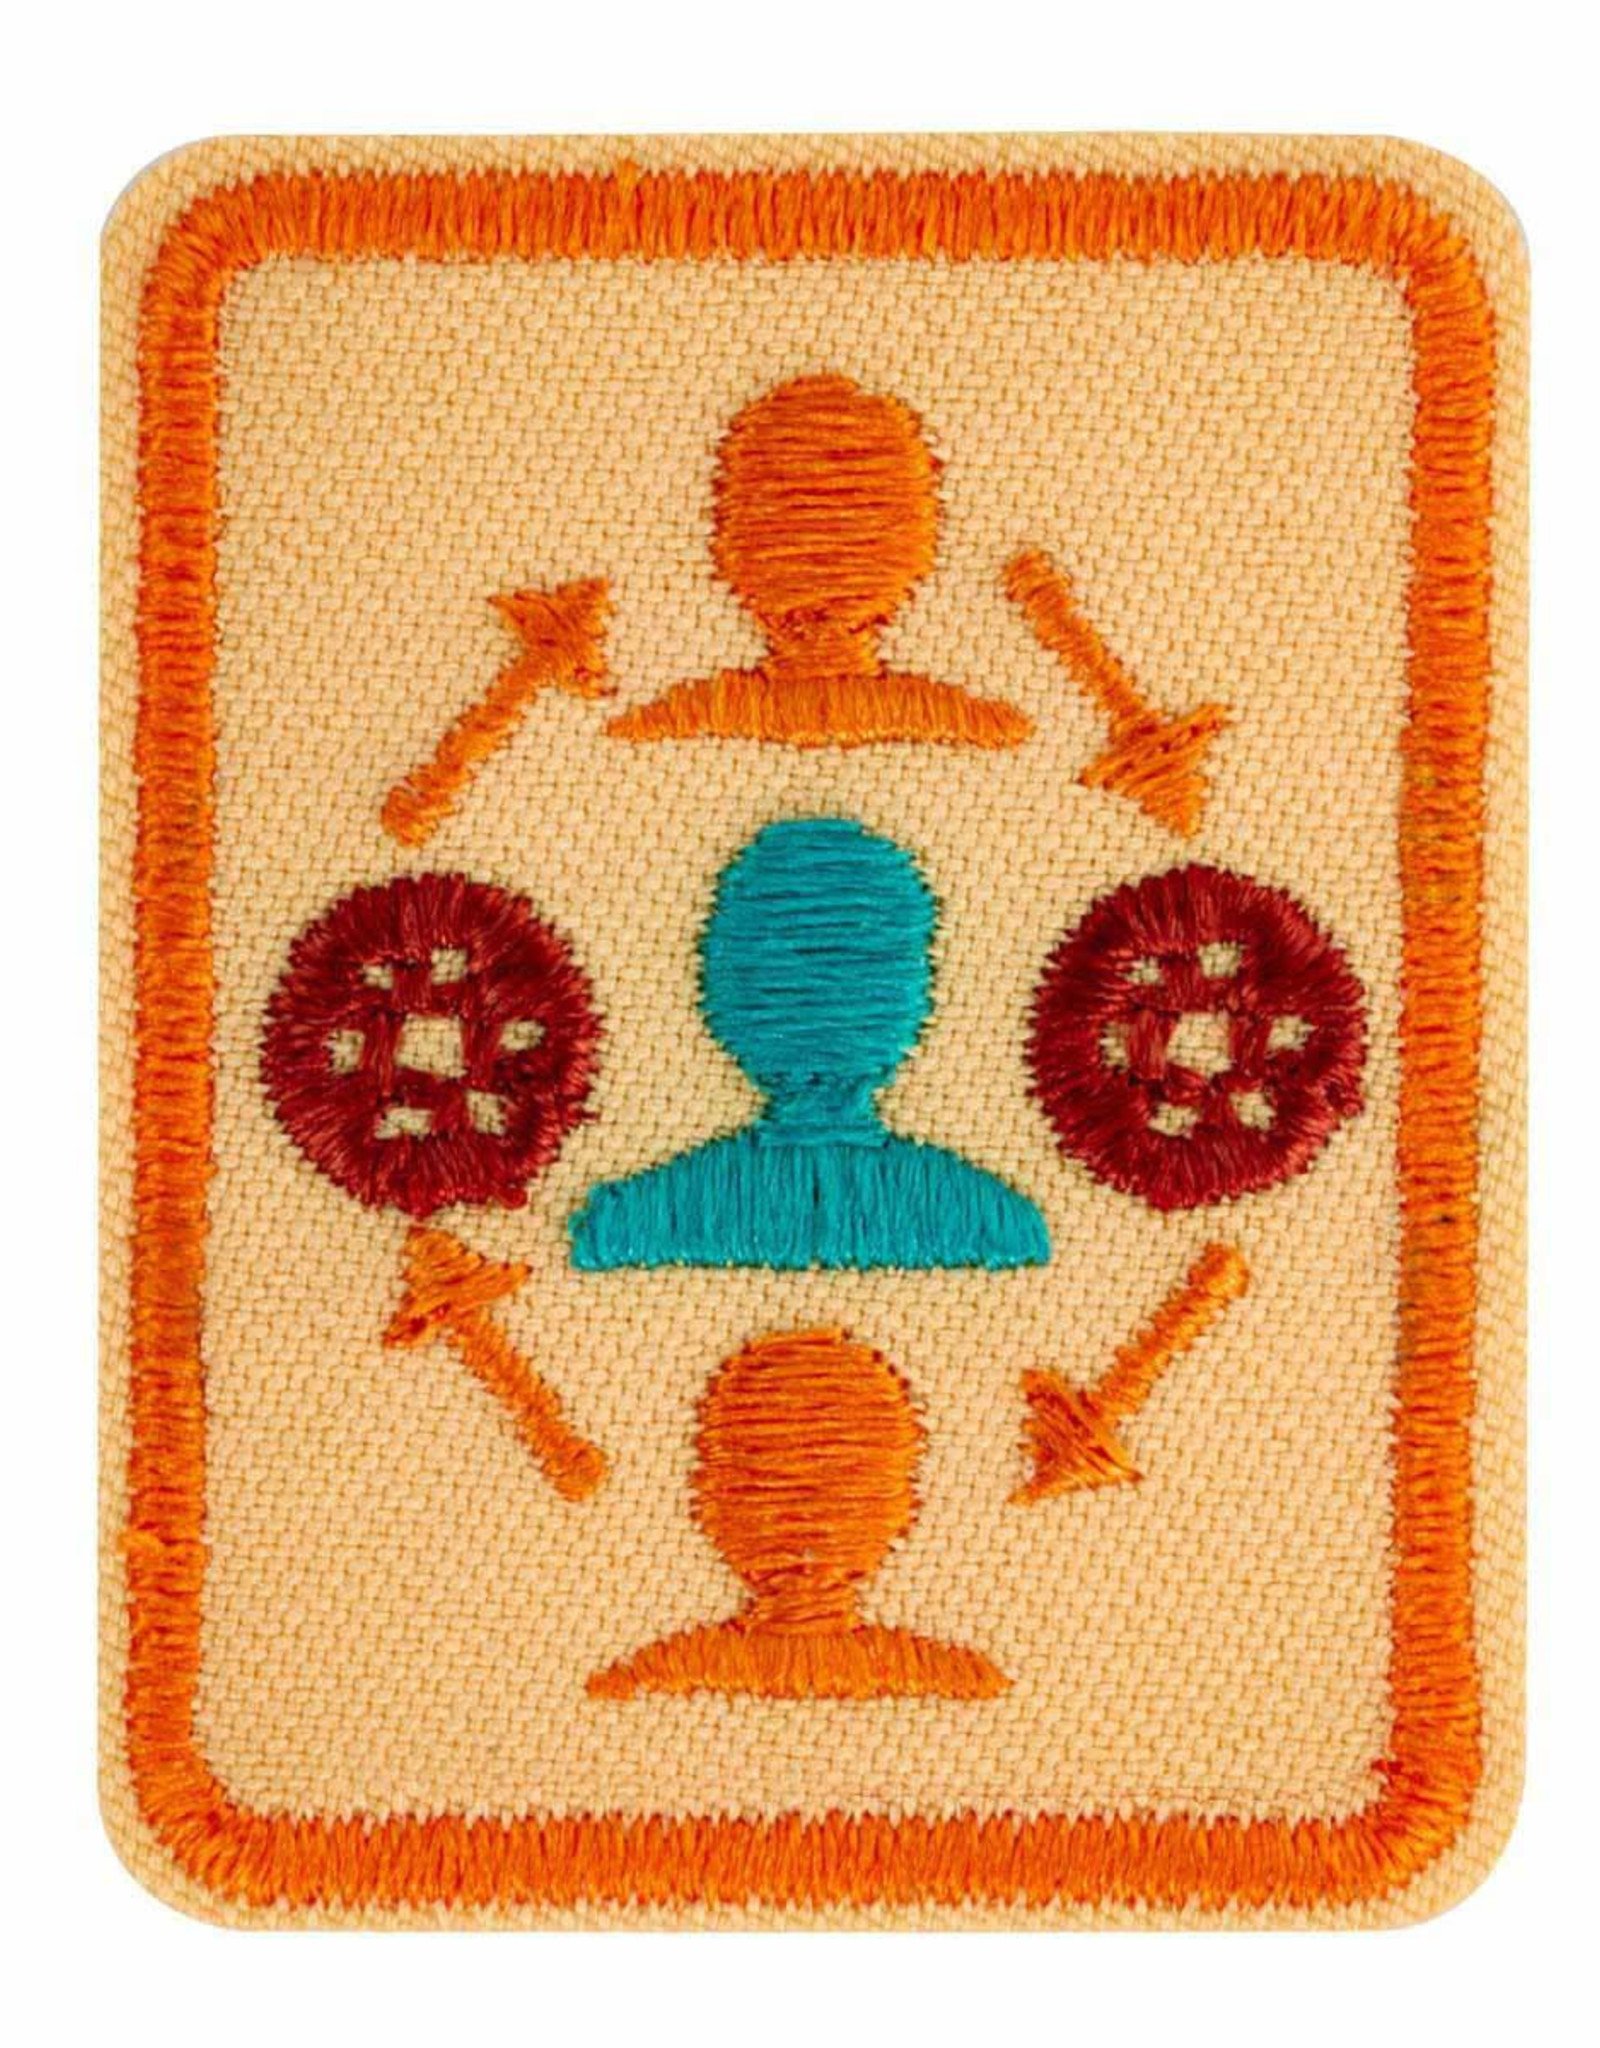 GIRL SCOUTS OF THE USA Senior My Cookie Network  Badge